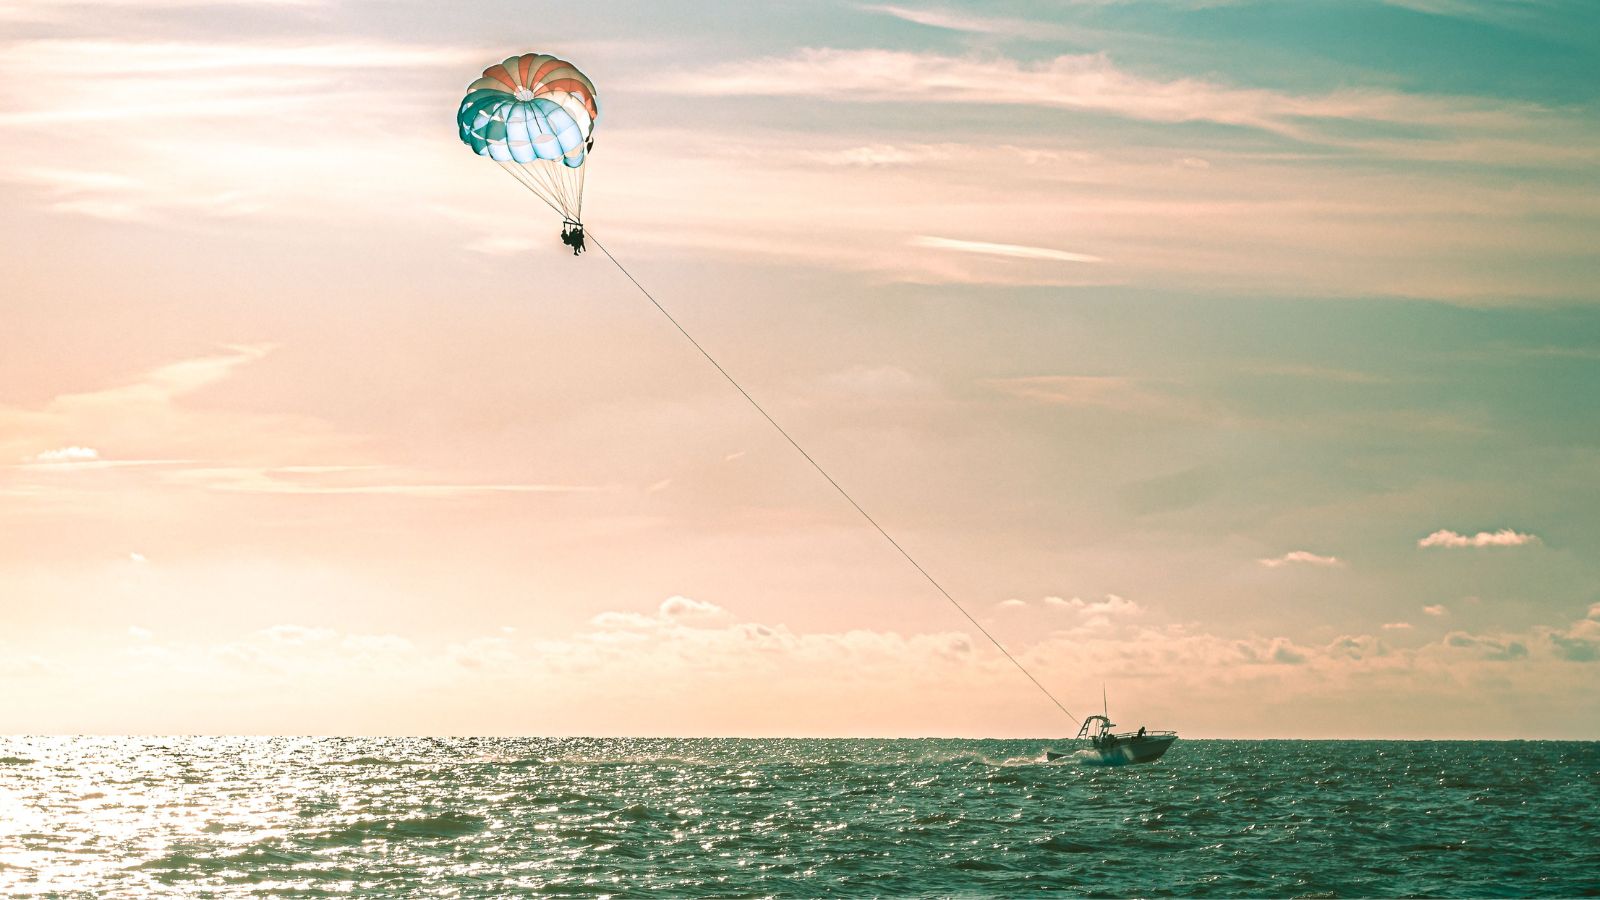 Parasailing at sunset above Clearwater Beach, Florida (Photo: Envato)